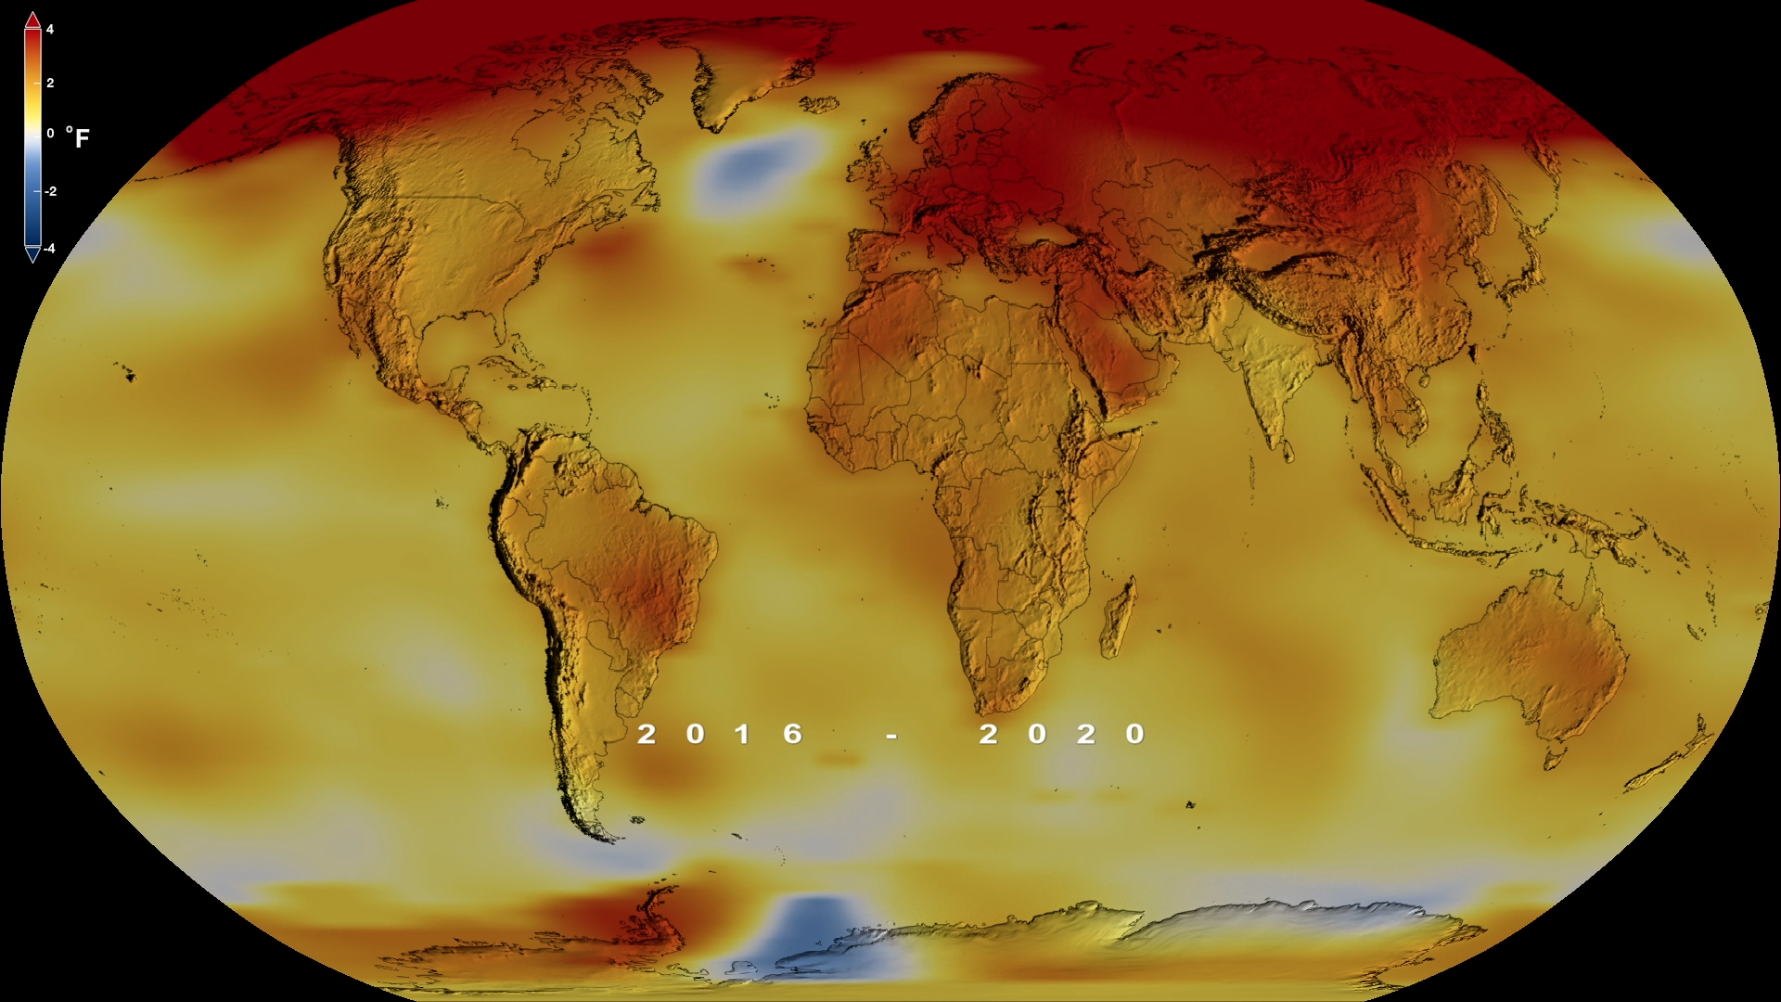 Preview Image for NASA Finds 2020 Tied for Hottest Year on Record